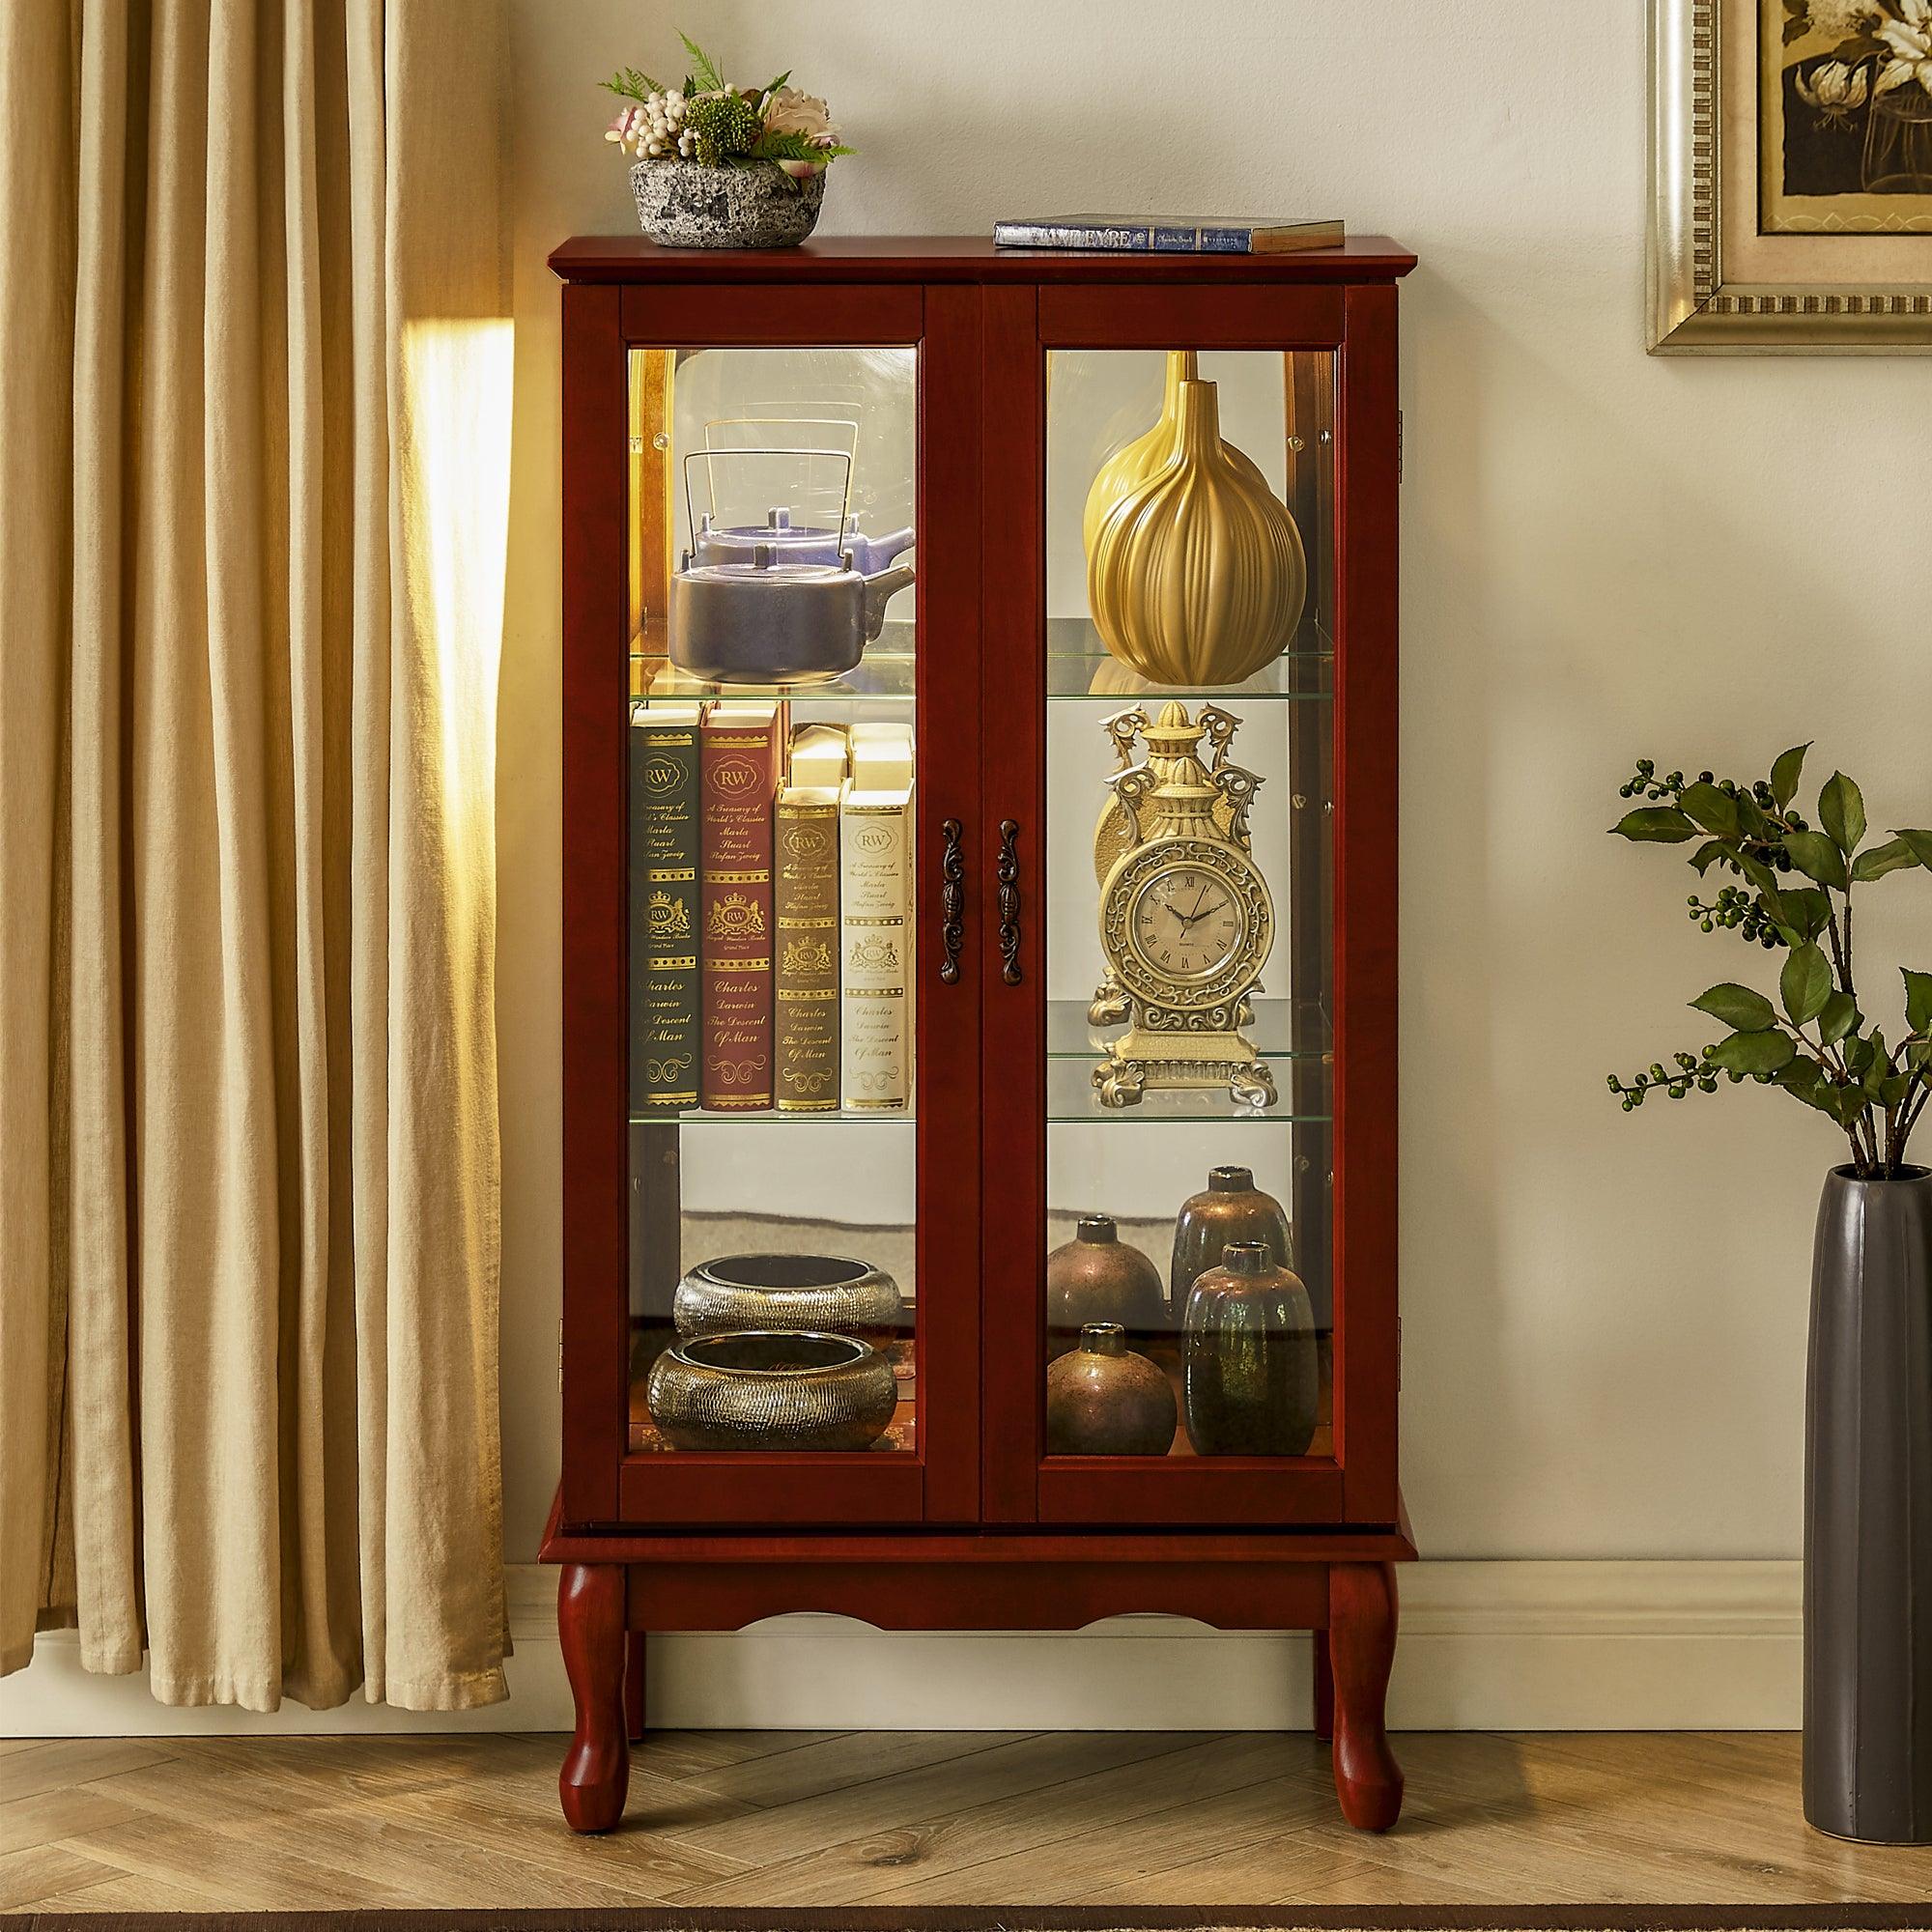 🆓🚛 3 Tier Curio Cabinet Lighted Diapaly Cabinet With Adjustable Shelves & Mirrored Back Panel, Tempered Glass Doors, Cherry, (E26 Light Bulb Not Included)